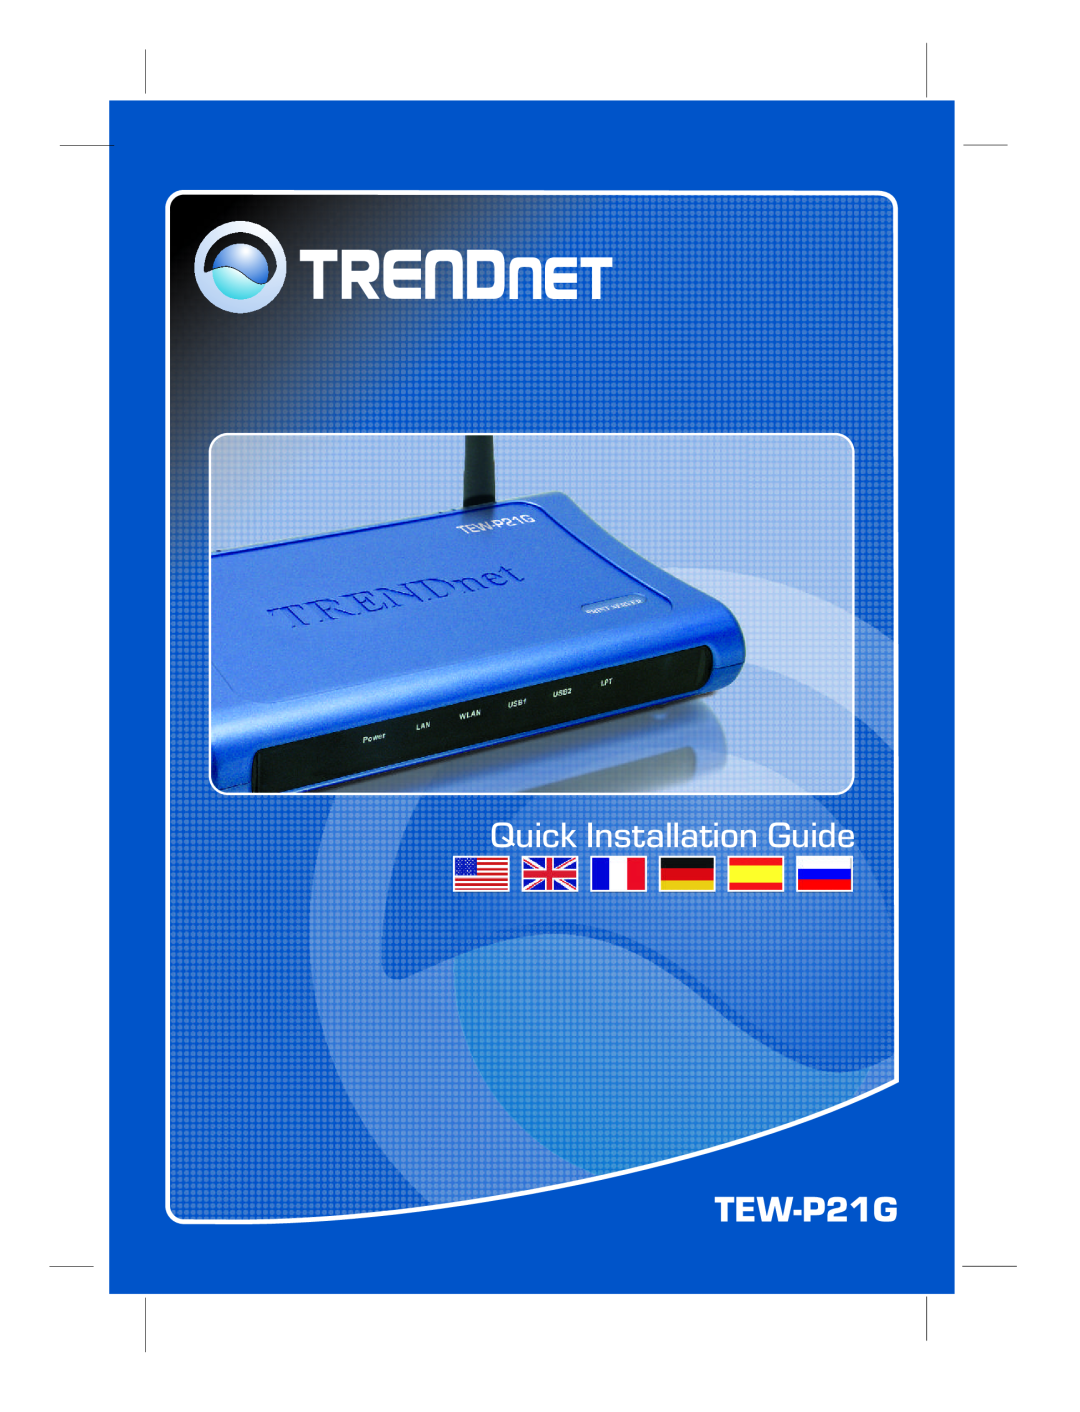 TRENDnet TEW-P21G manual Quick Installation Guide 